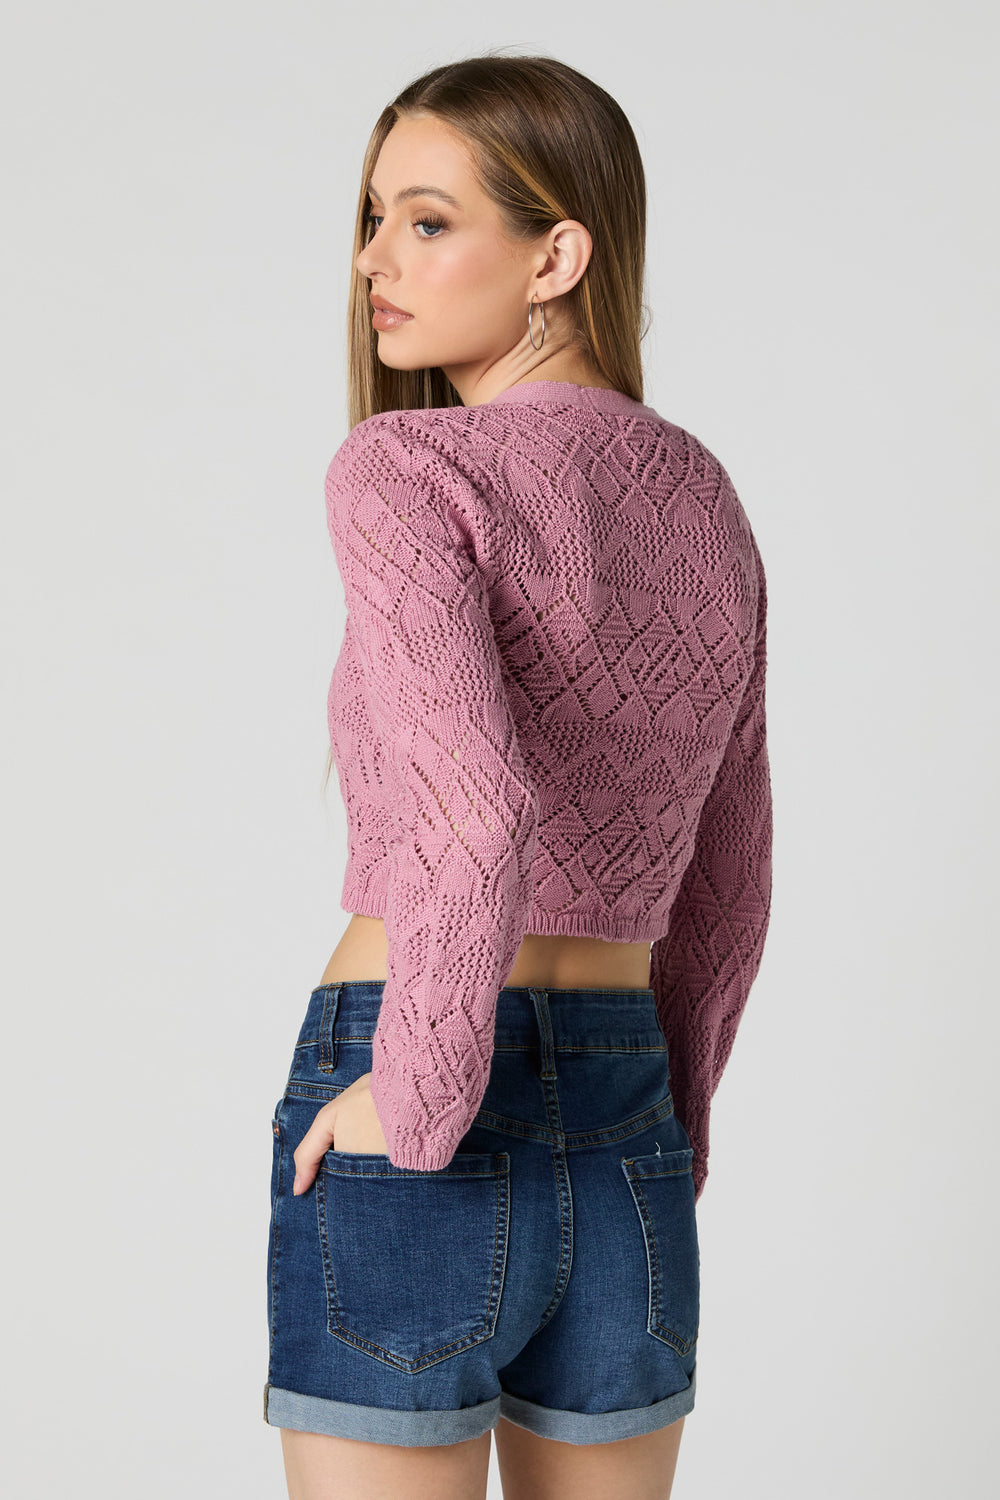 Crochet Front Tie Cropped Long Sleeve Top Crochet Front Tie Cropped Long Sleeve Top 2